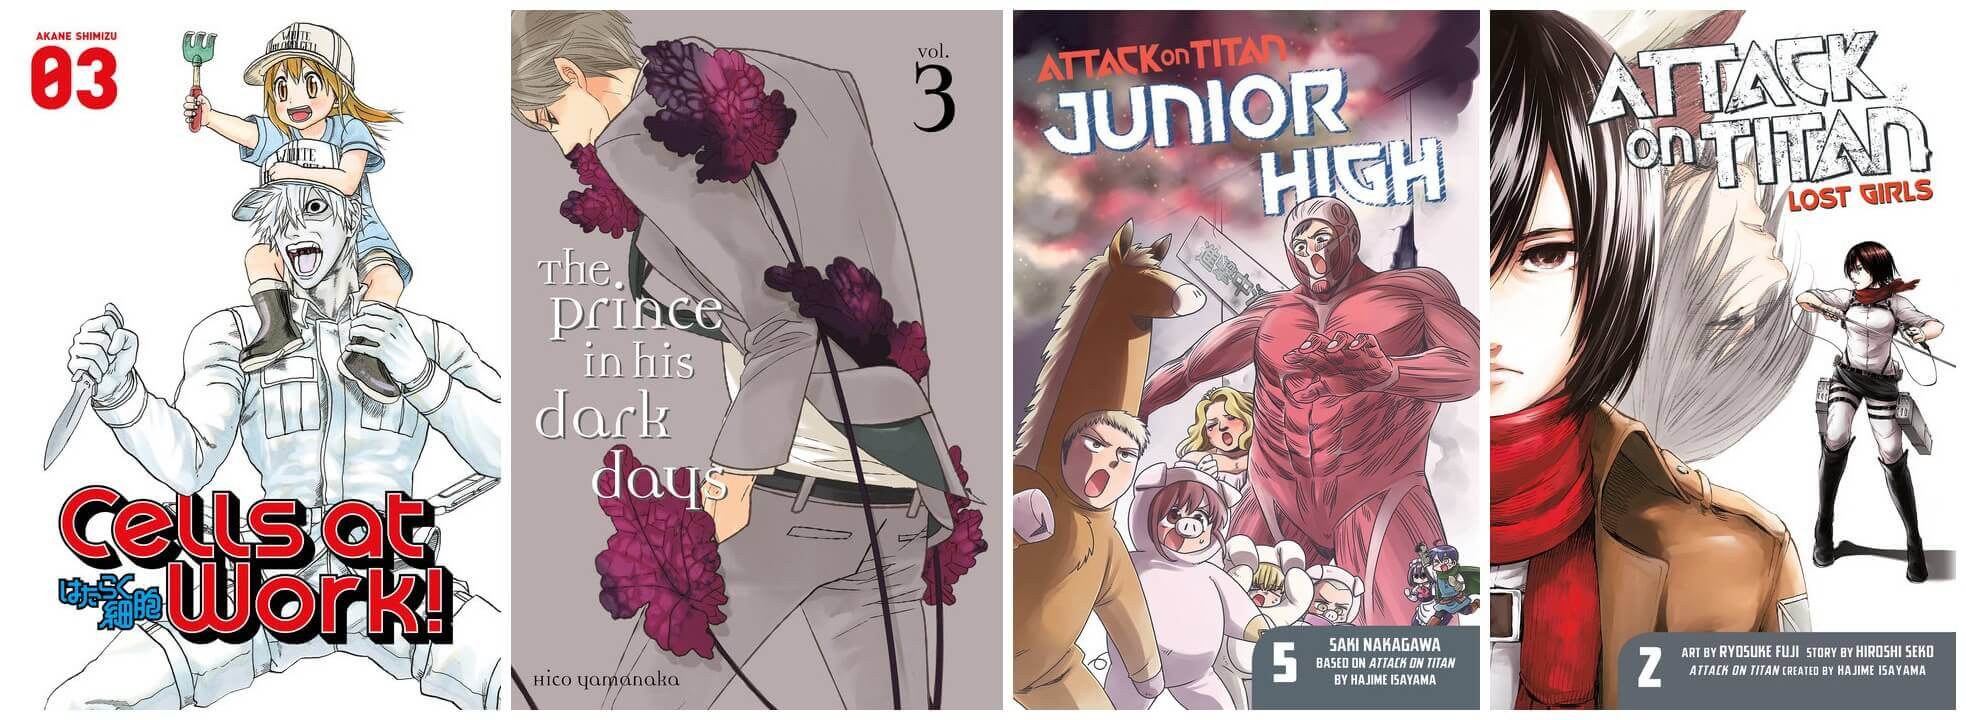 February 2017 Manga Releases Covers of Cells at Work, The Prince in His Dark Days, Attack on Titan Junior High, and Attack on Titan Lost Girls.